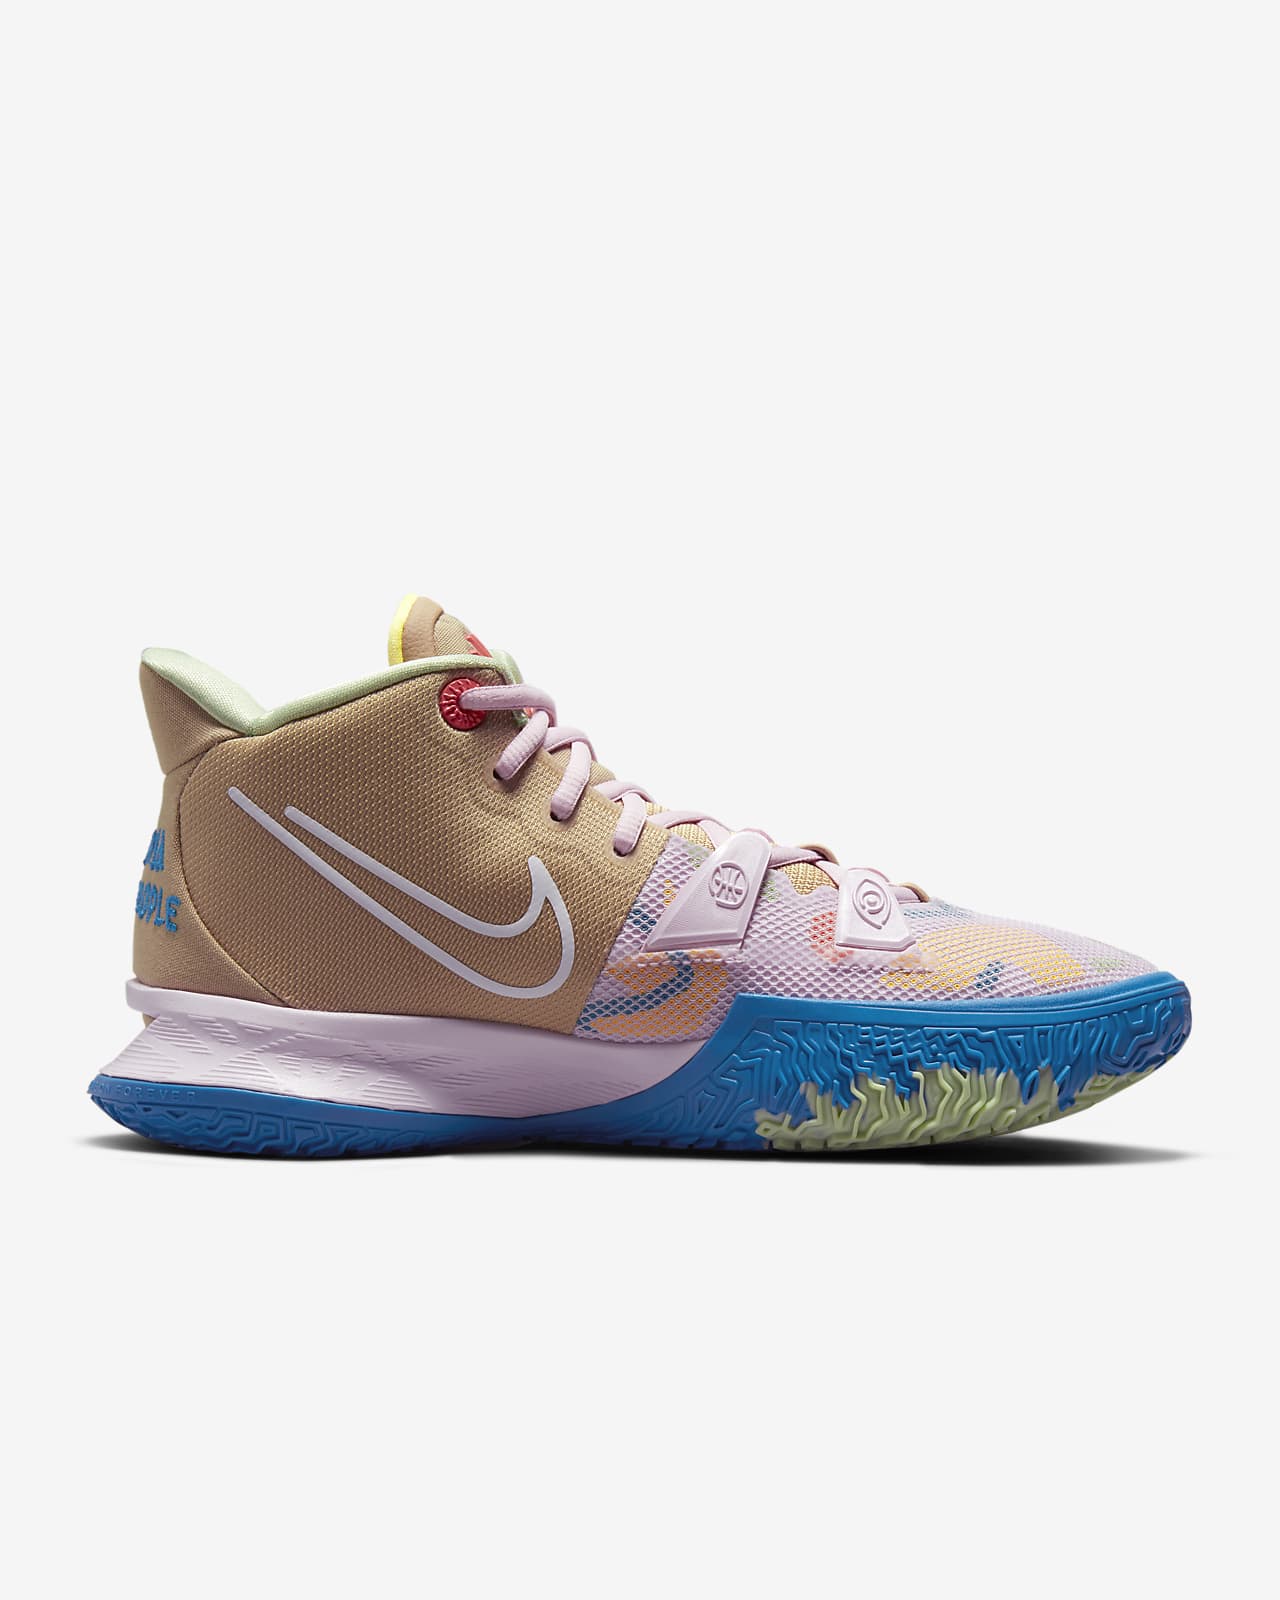 Kyrie 7 Basketball Shoes